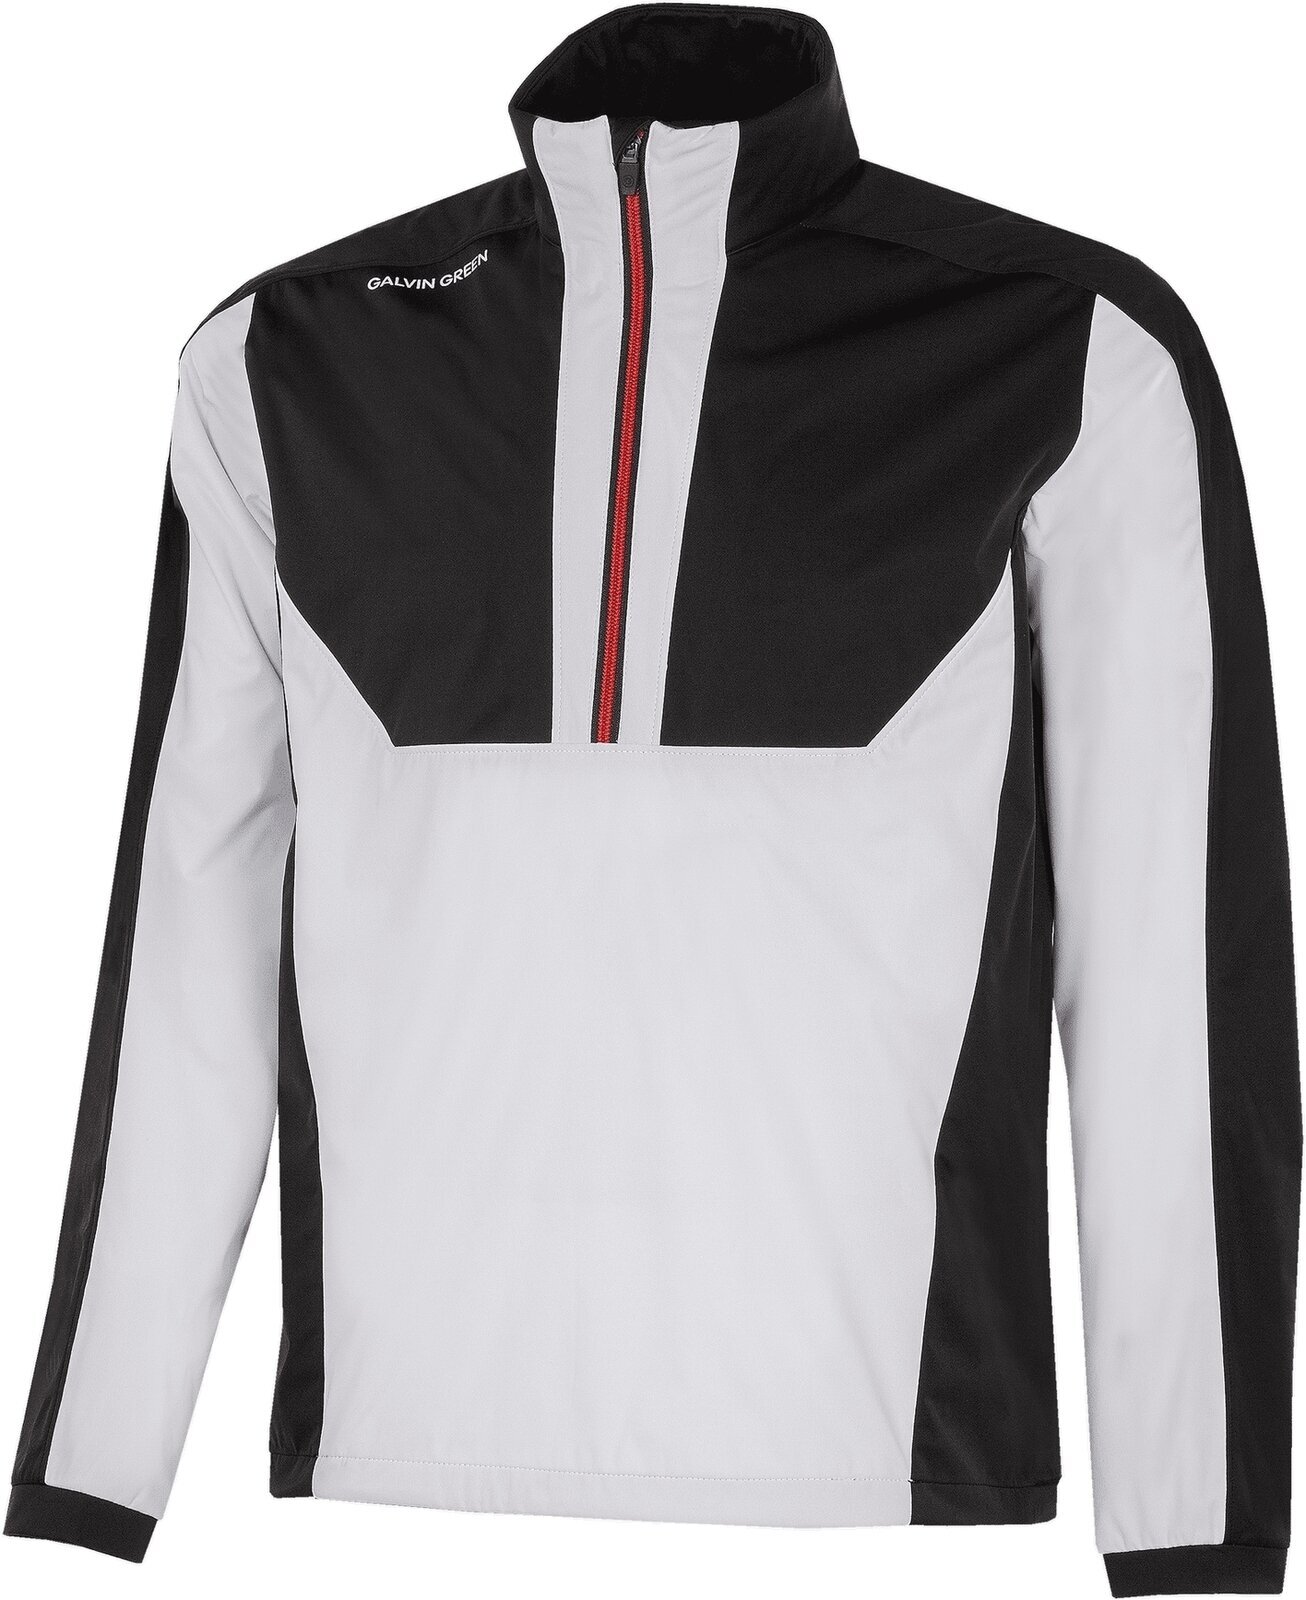 Bunda Galvin Green Lawrence Mens Windproof And Water Repellent Jacket White/Black/Red L